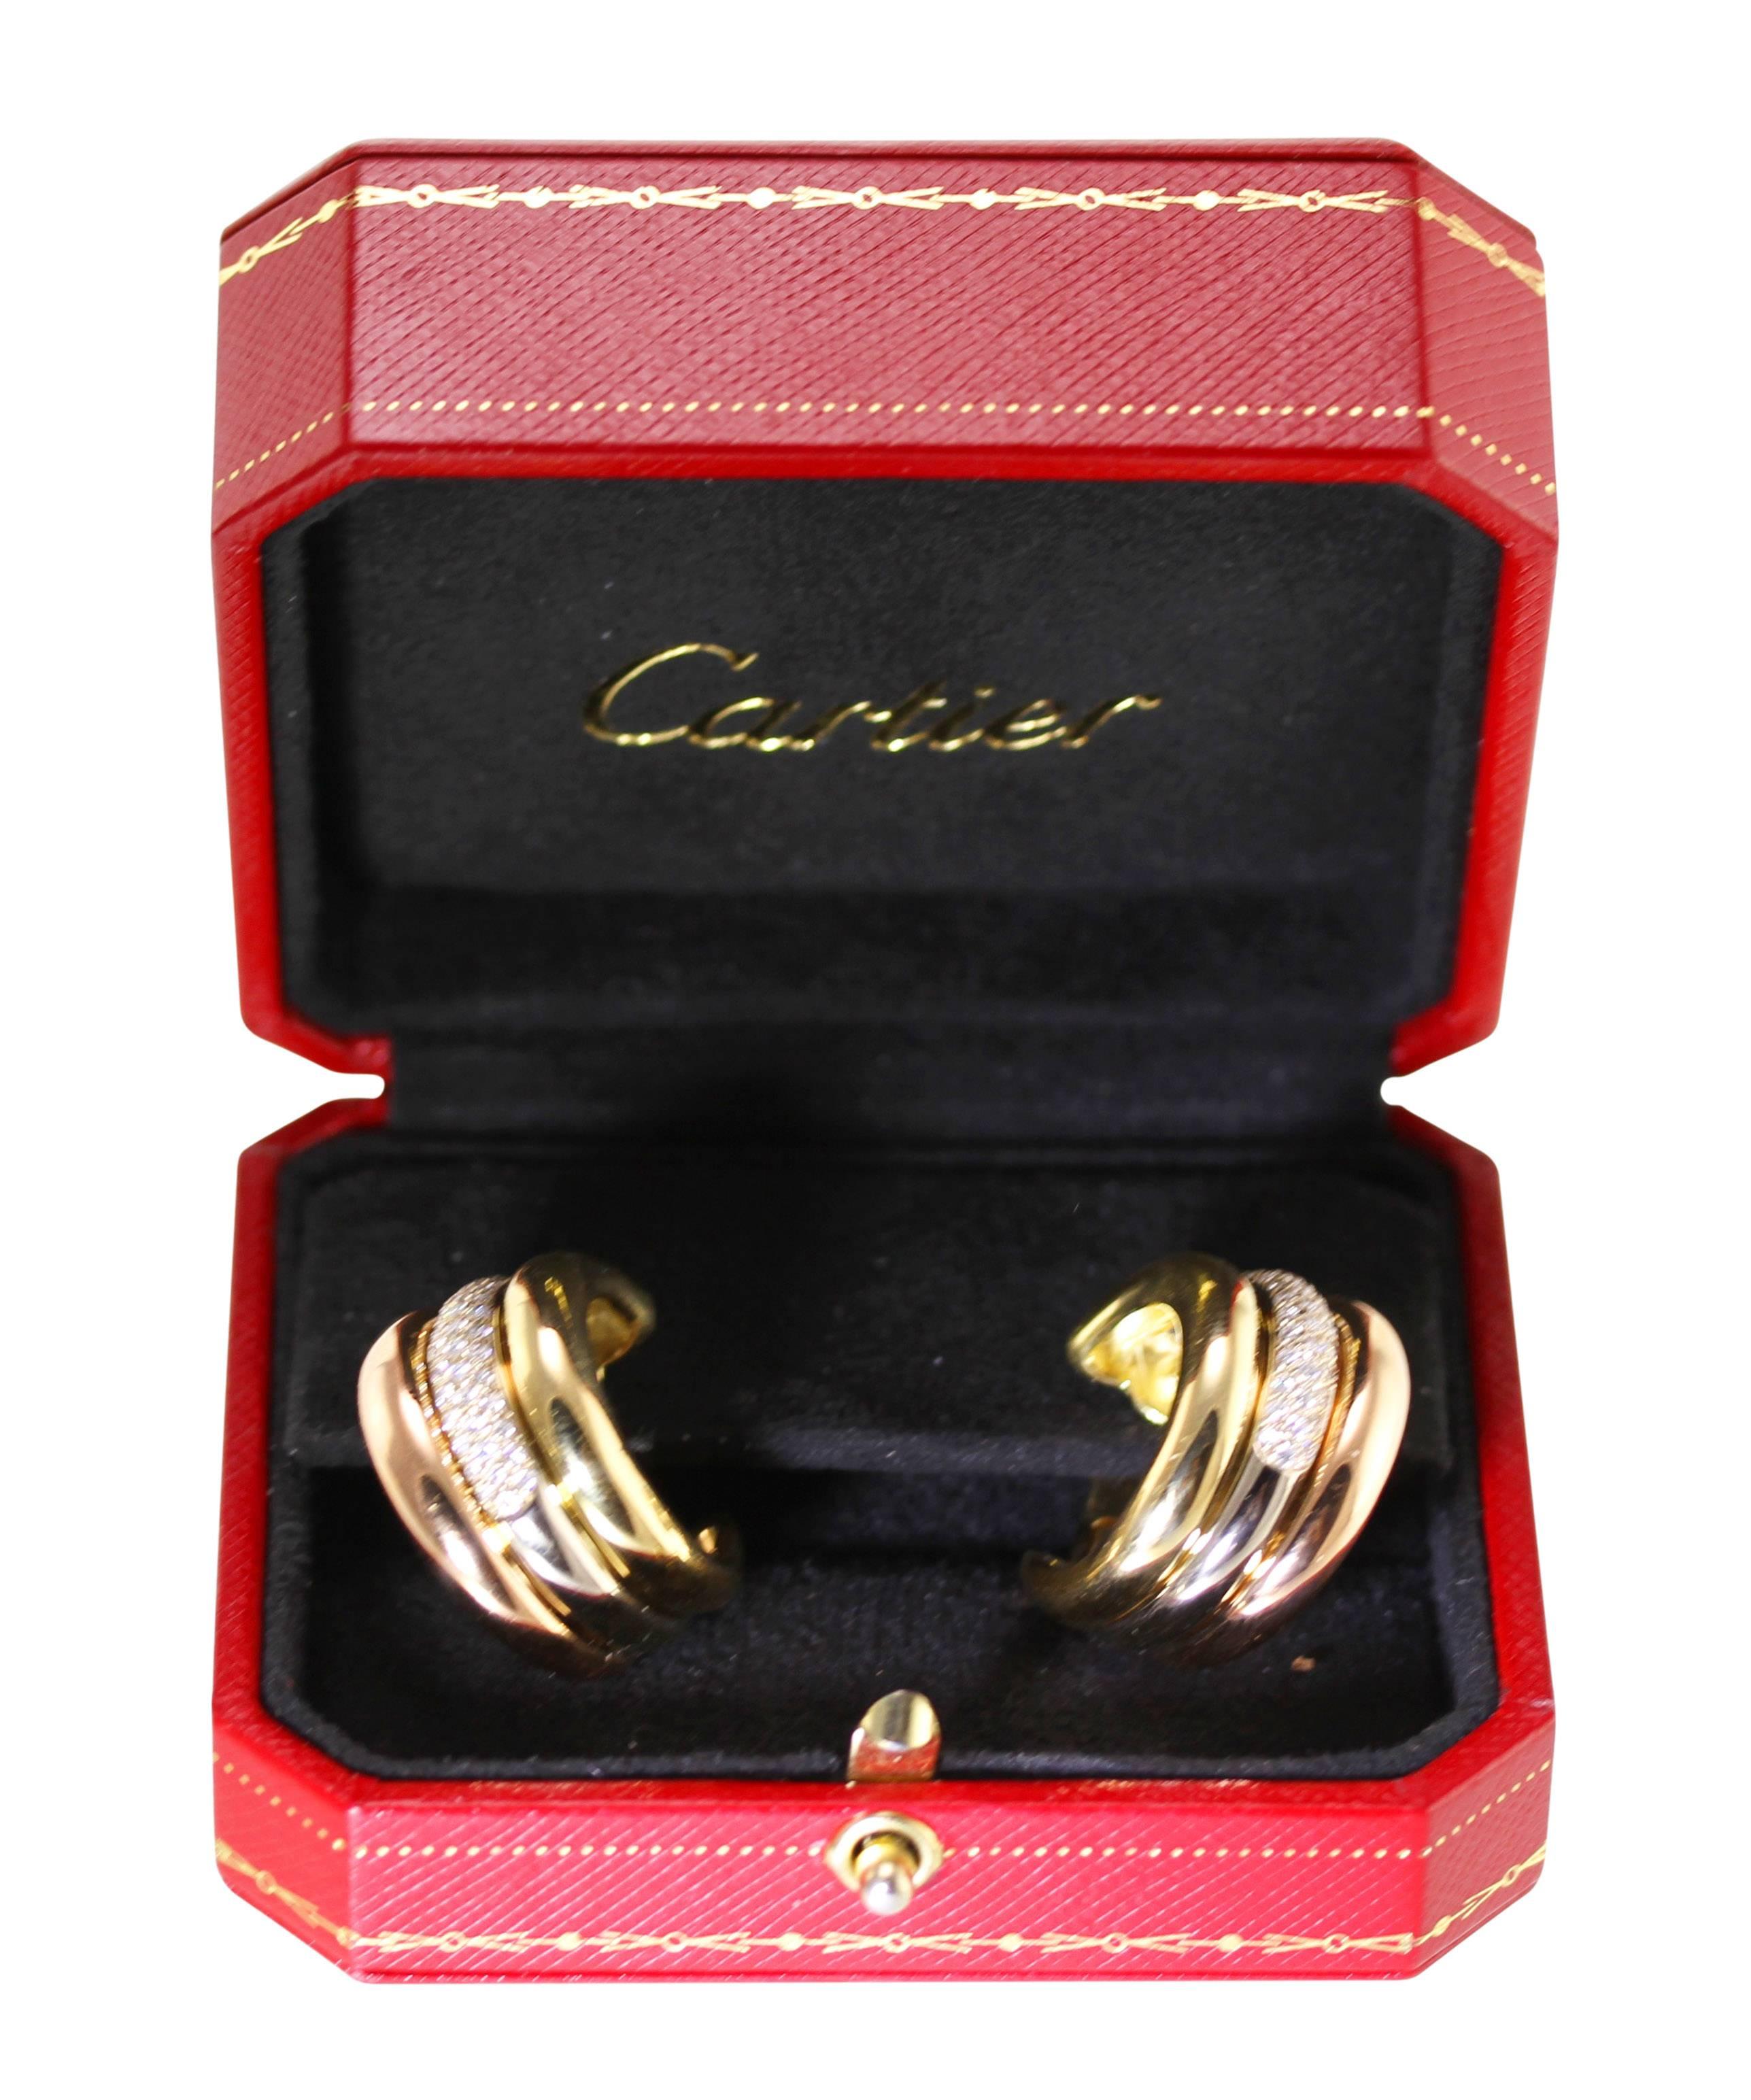 Pair of 18 karat tri-tone gold and diamond earclips by Cartier, circa 1995
• Signed Cartier, numbered D38169, stamped CARTIER C 1995
• 88 round diamonds approximately 1.25 carats
• Gross weight 34.7 grams, measuring 1 by 1/2 by 1 inch